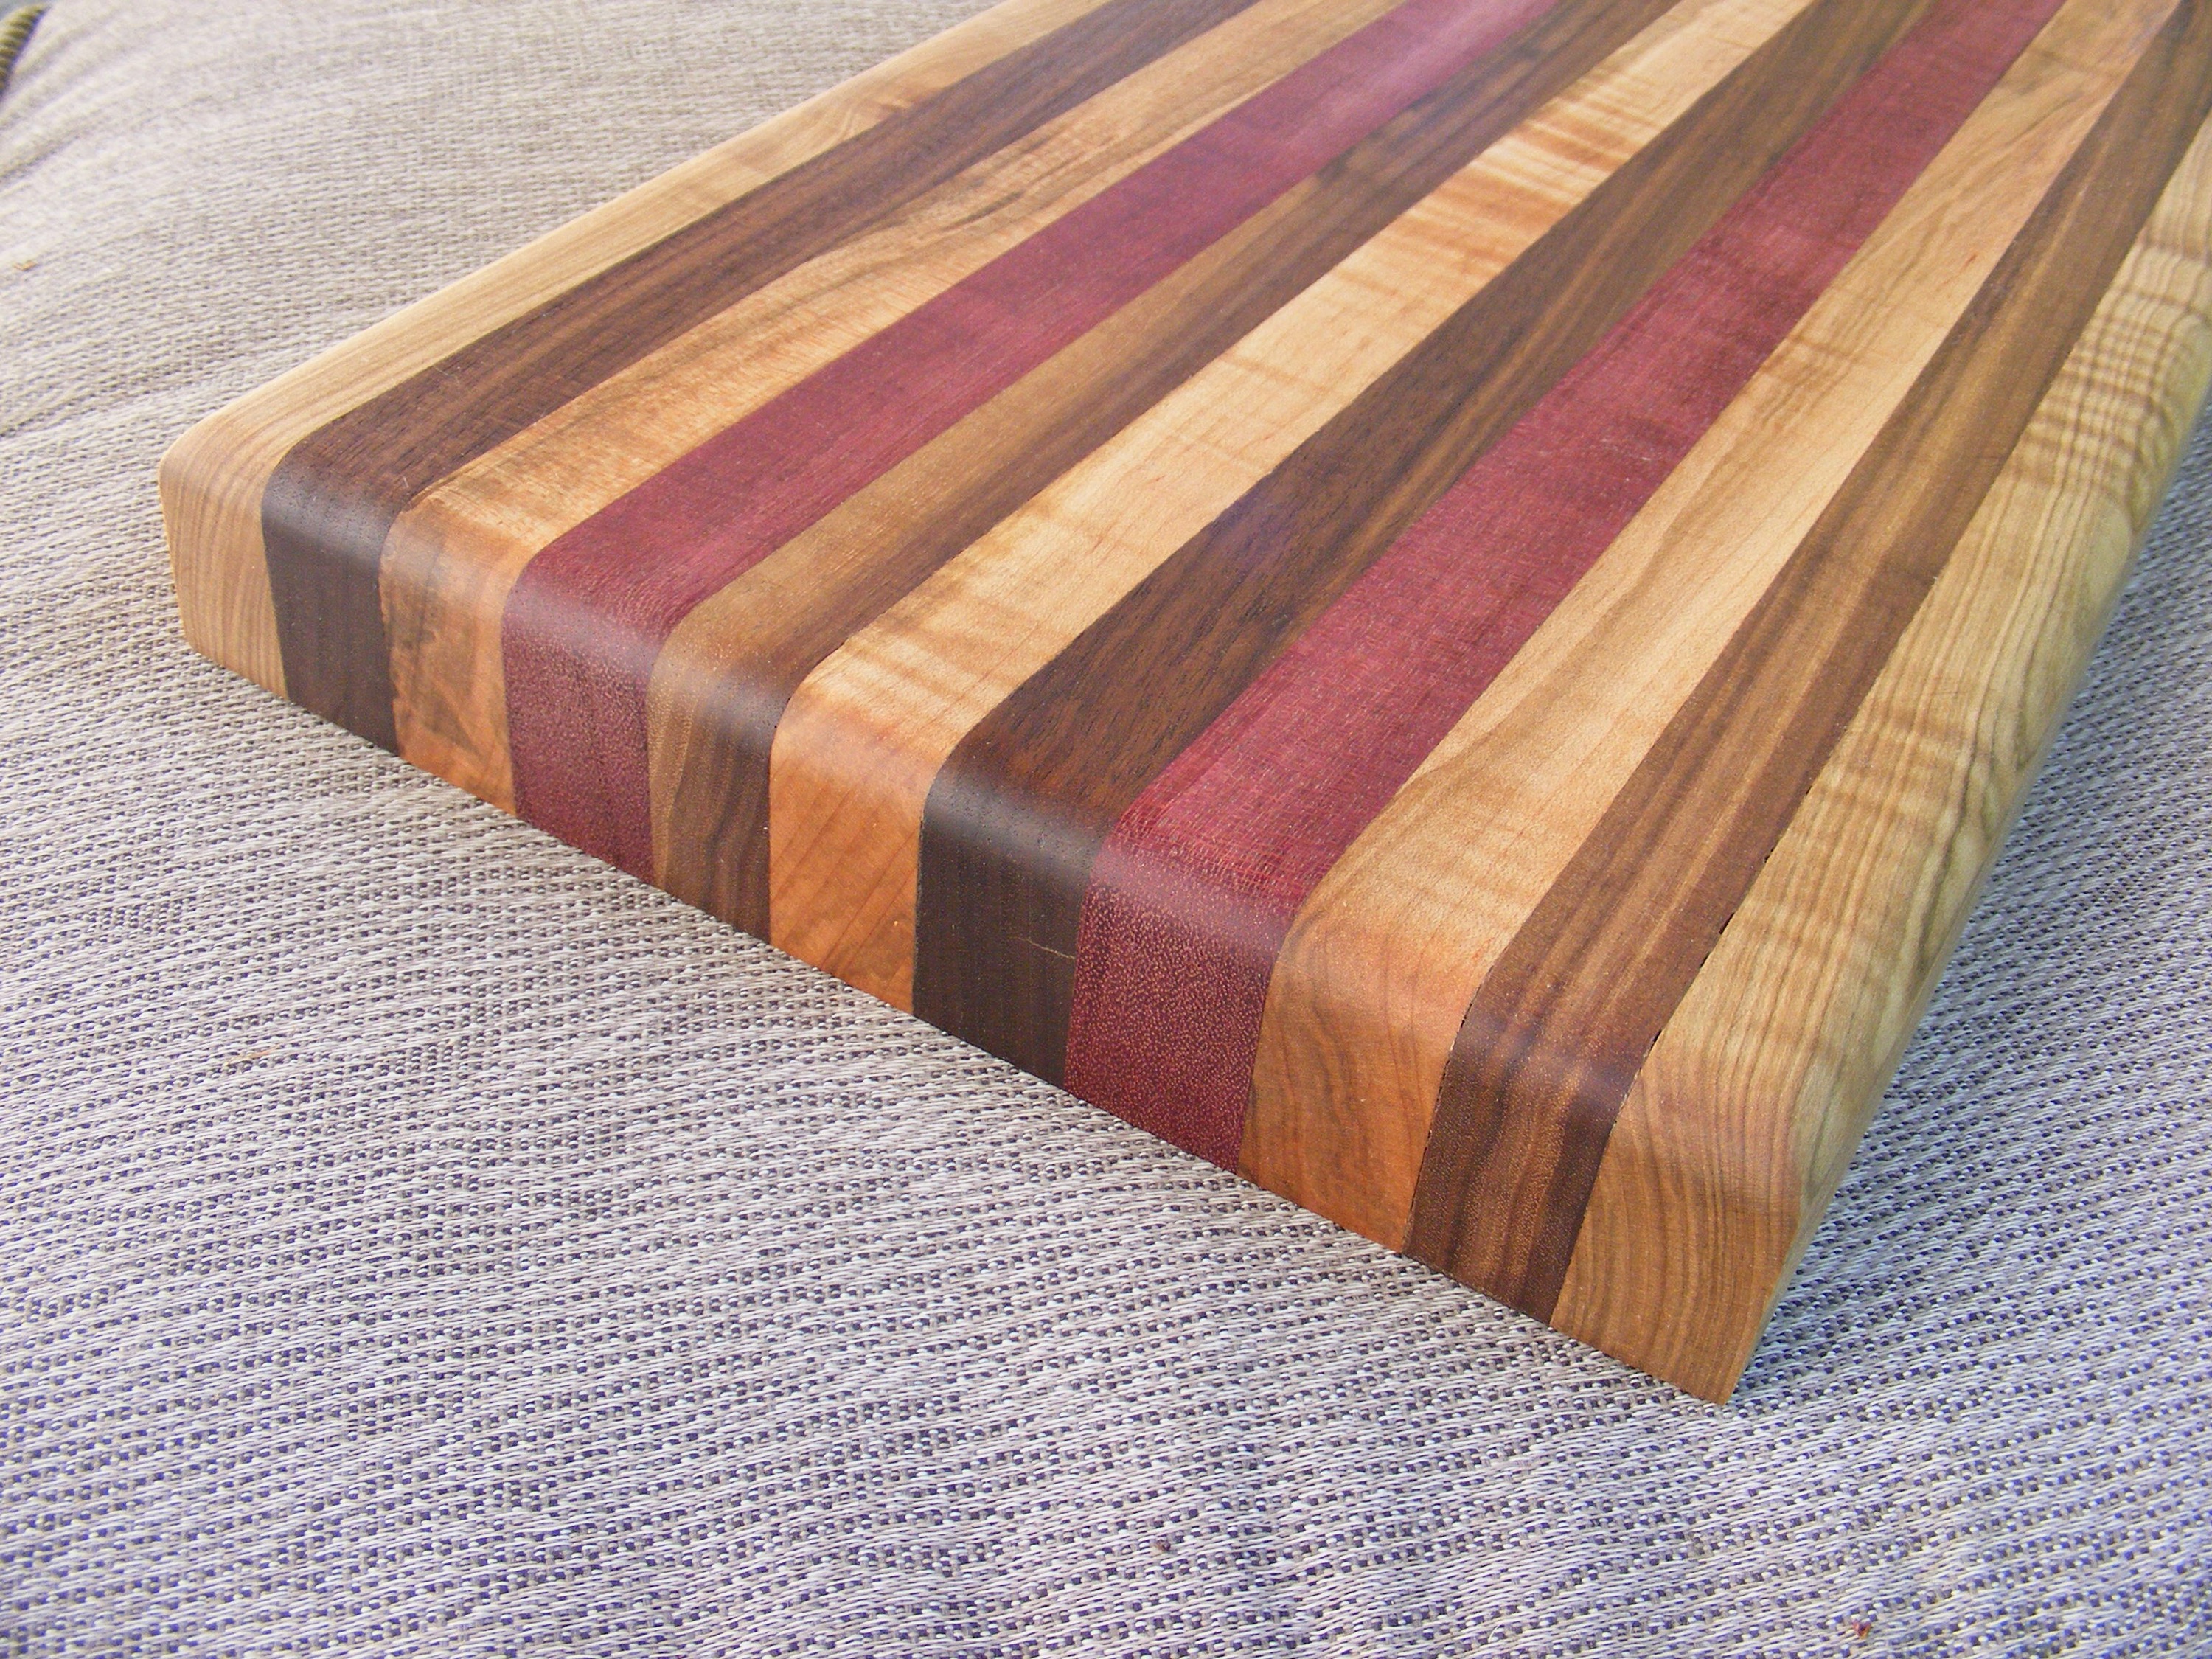 The Best Oil For Cutting Boards - Hardwood Lumber Company